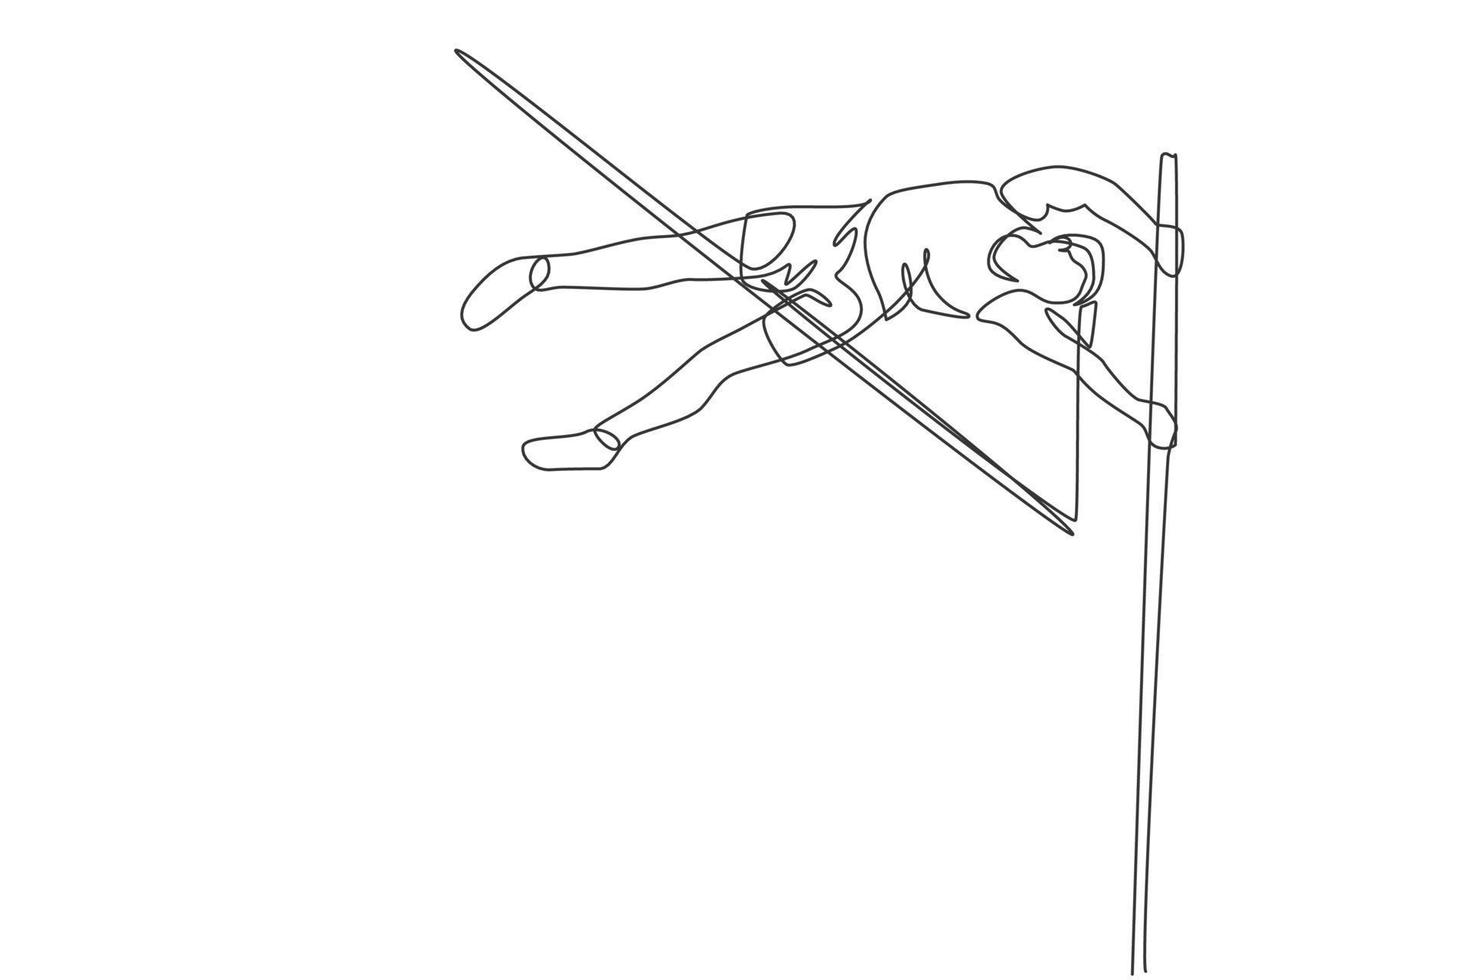 One single line drawing of young energetic woman exercise to pass the bar on pole vault game vector illustration. Healthy athletic sport concept. Competition event. Modern continuous line draw design